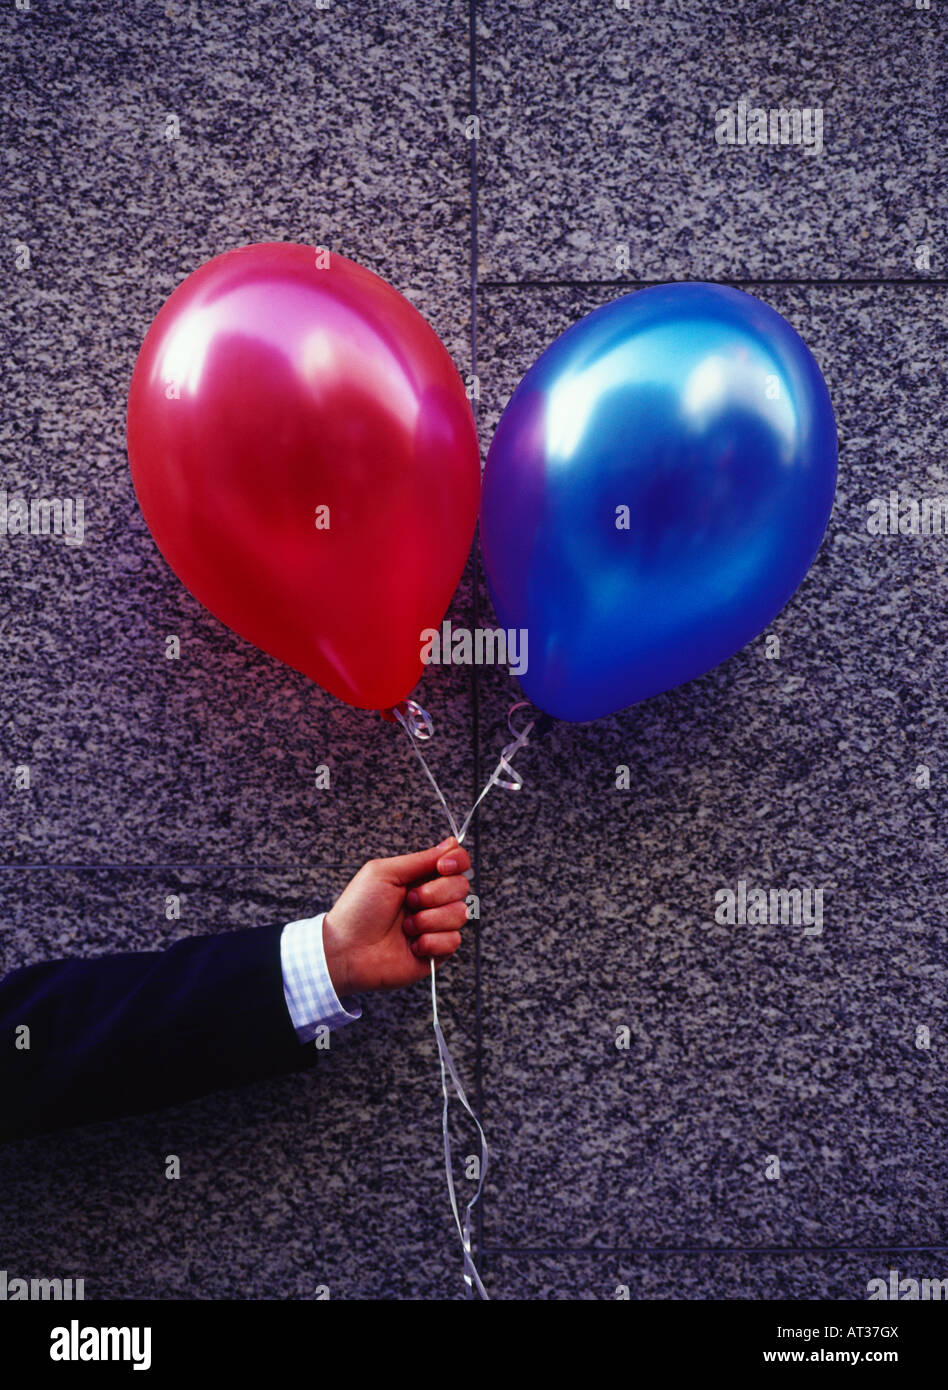 A man holding red and blue balloons Stock Photo